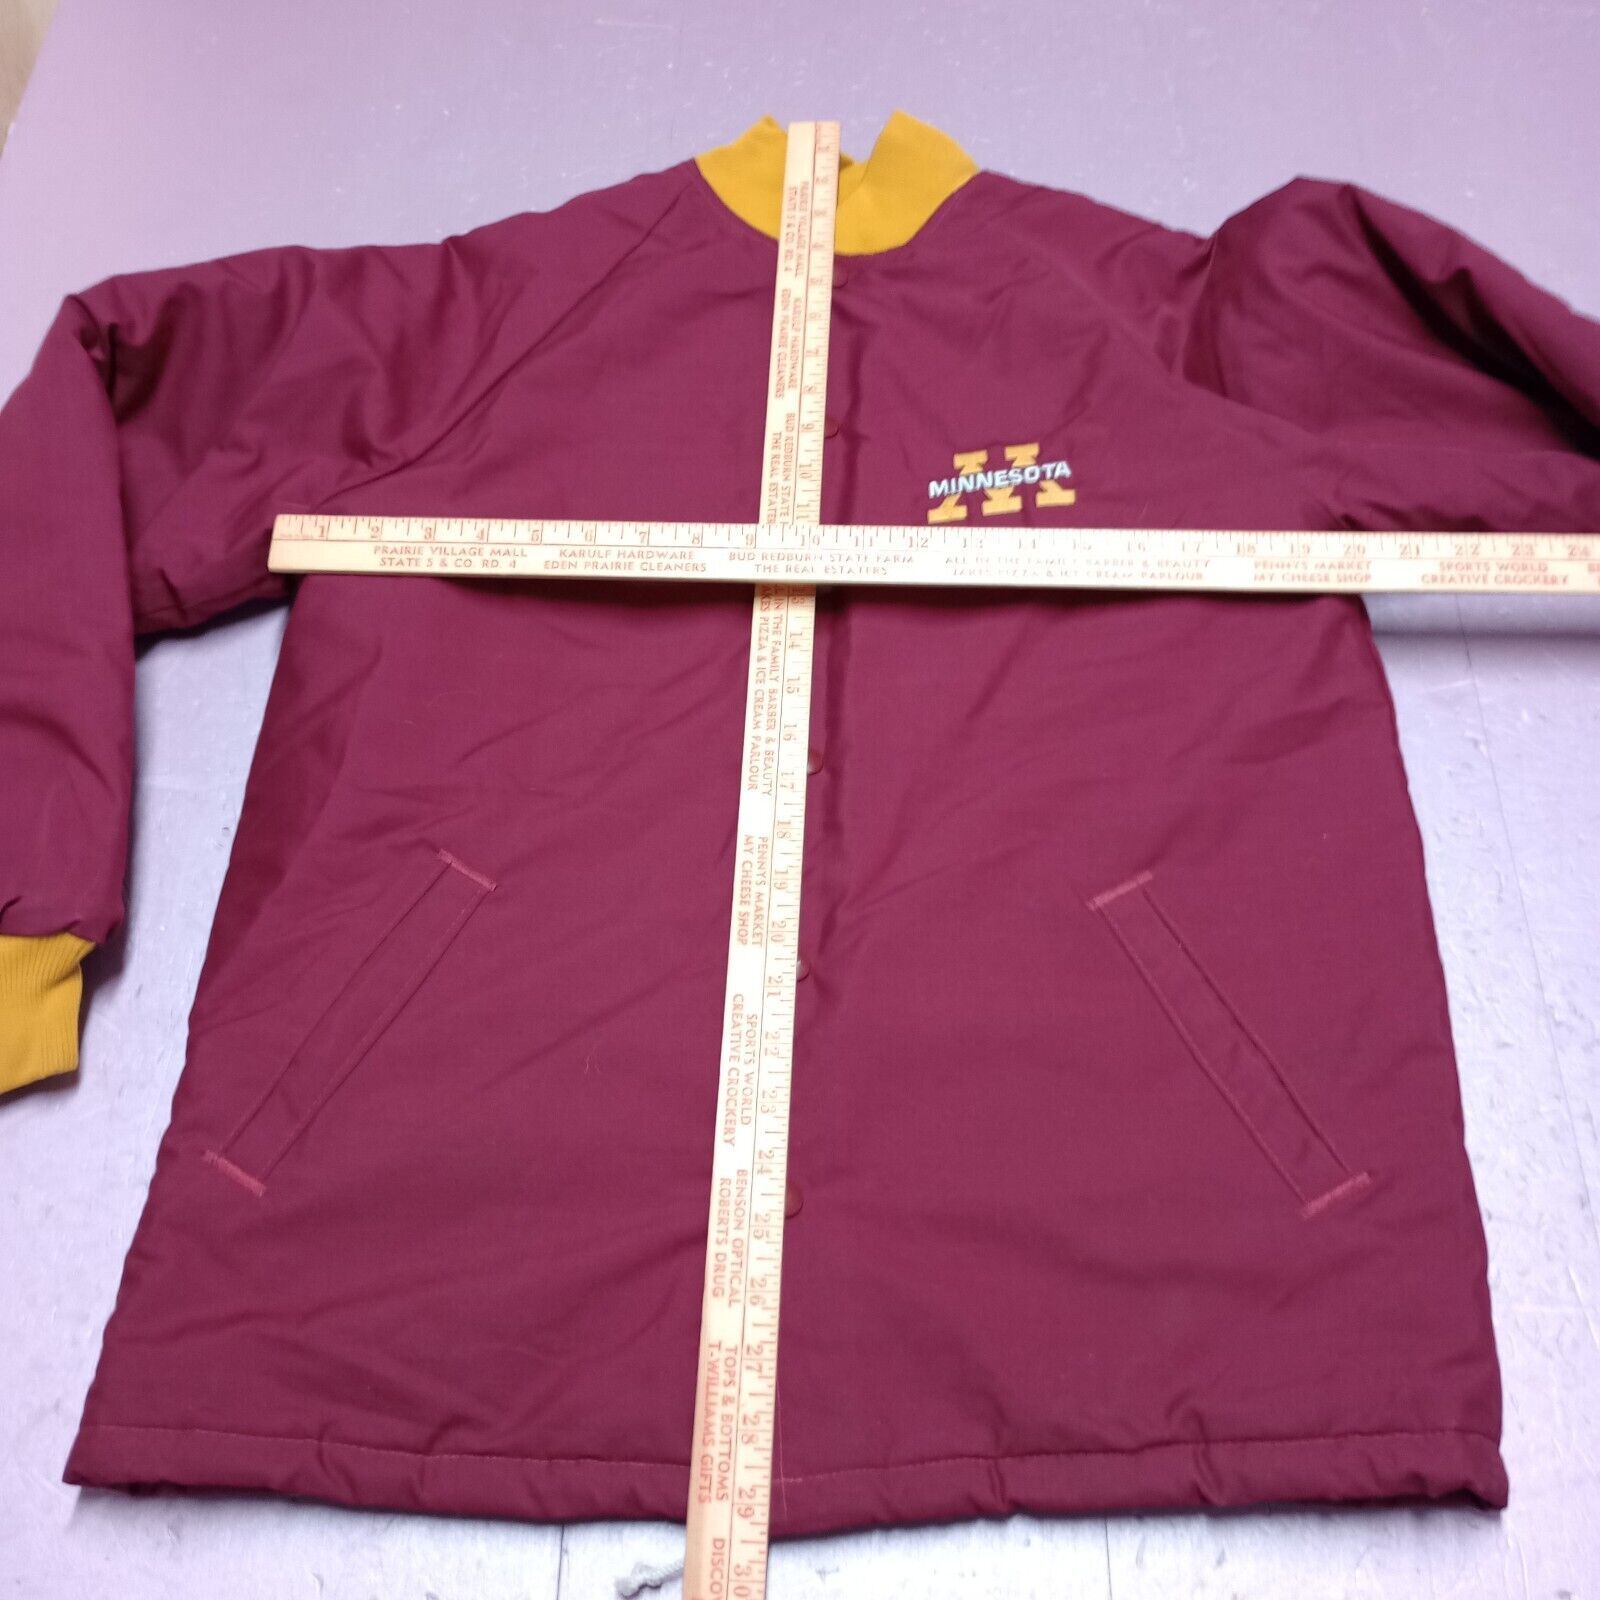 Primary image for VTG Minnesota Gophers Jacket Men Small Maroon Quilted Snap Bomber NCAA USA Made